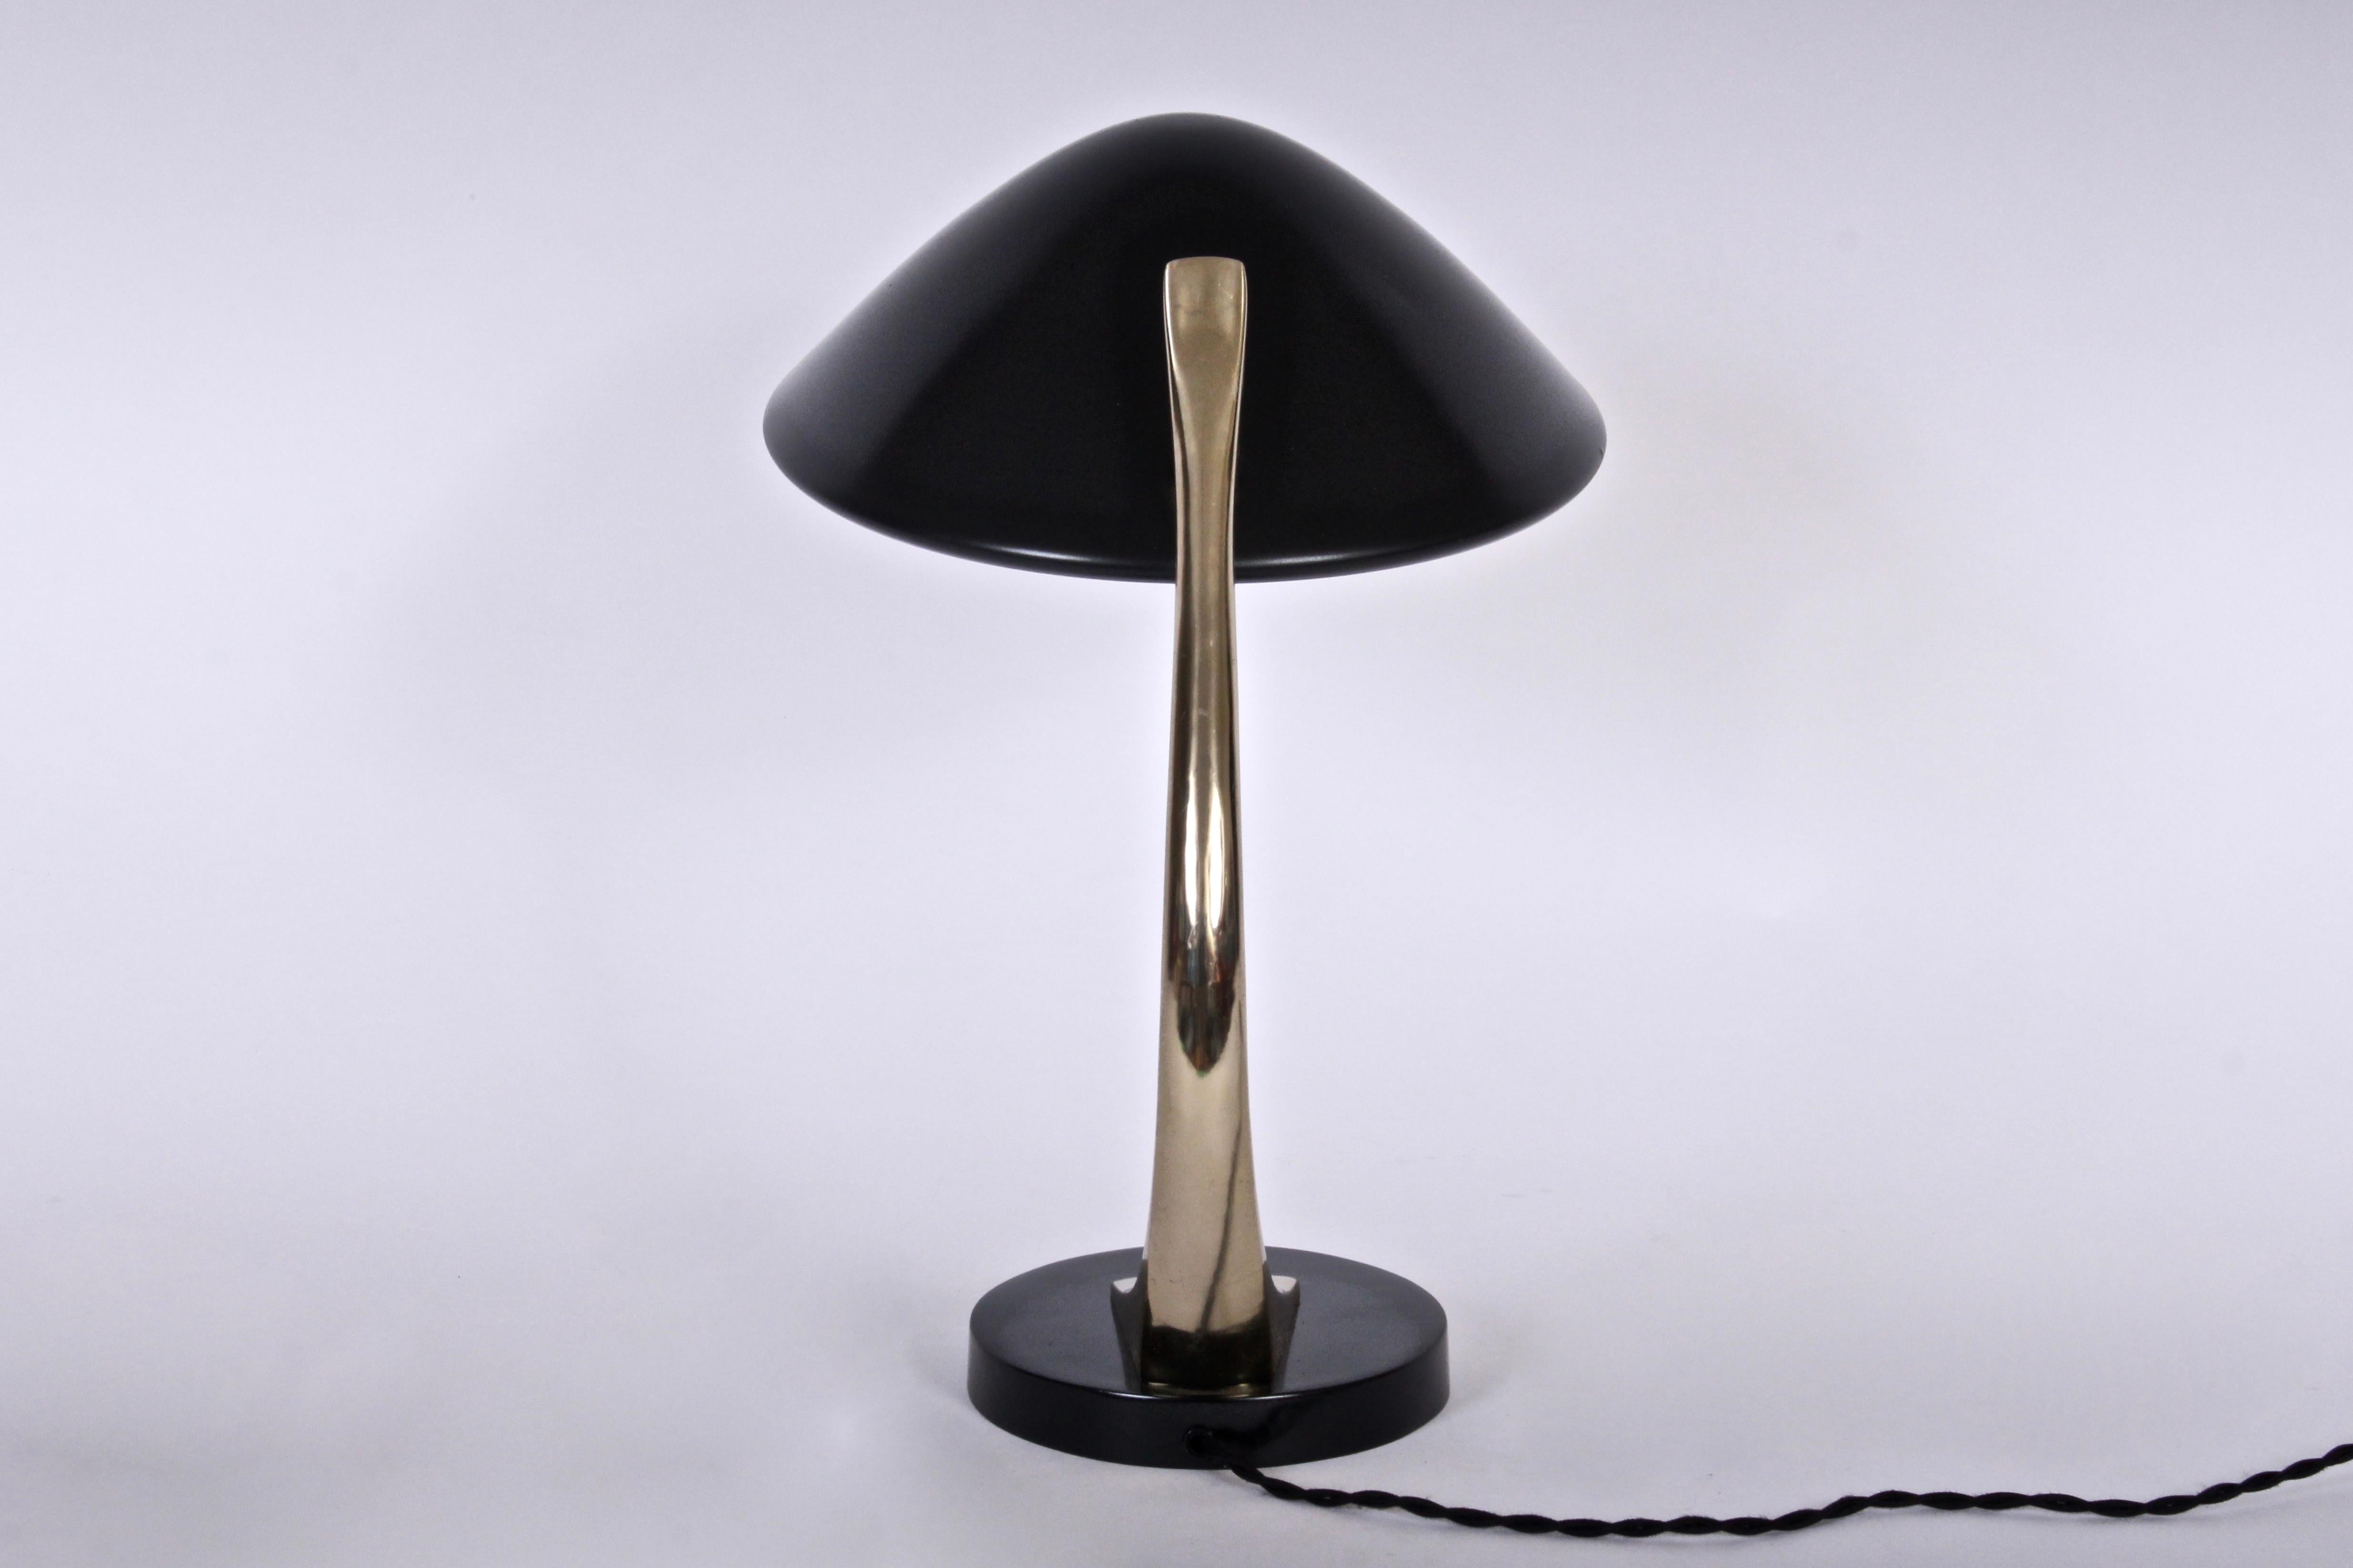 Mid-20th Century Maurizio Tempestini for Laurel Black and Brass Desk Lamp with Black Enamel Shade